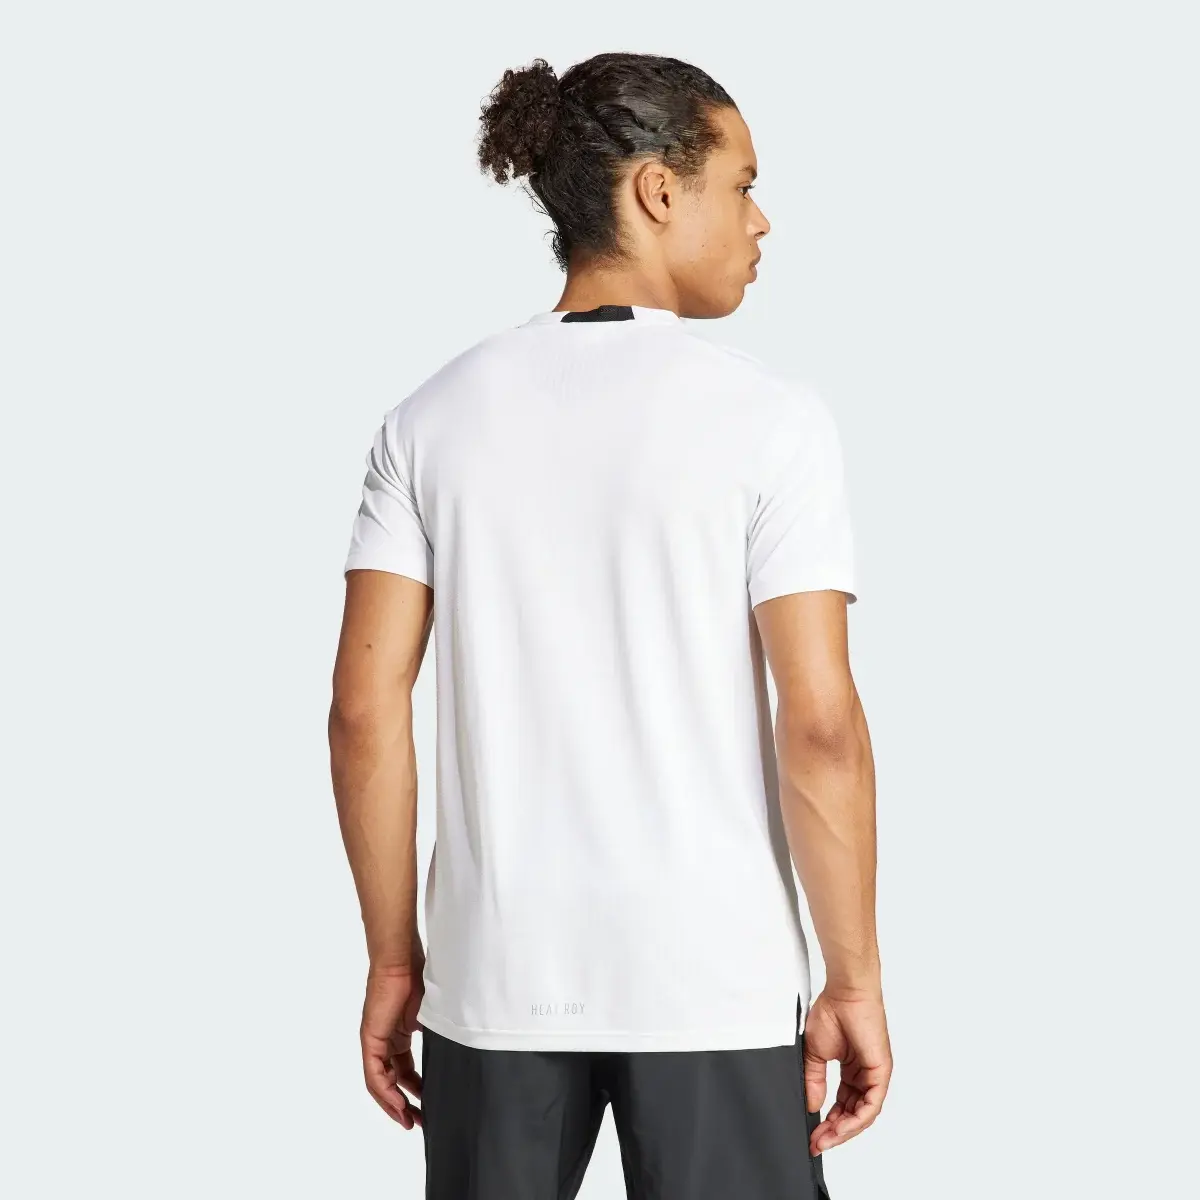 Adidas Designed for Training HIIT Workout HEAT.RDY Tee. 3